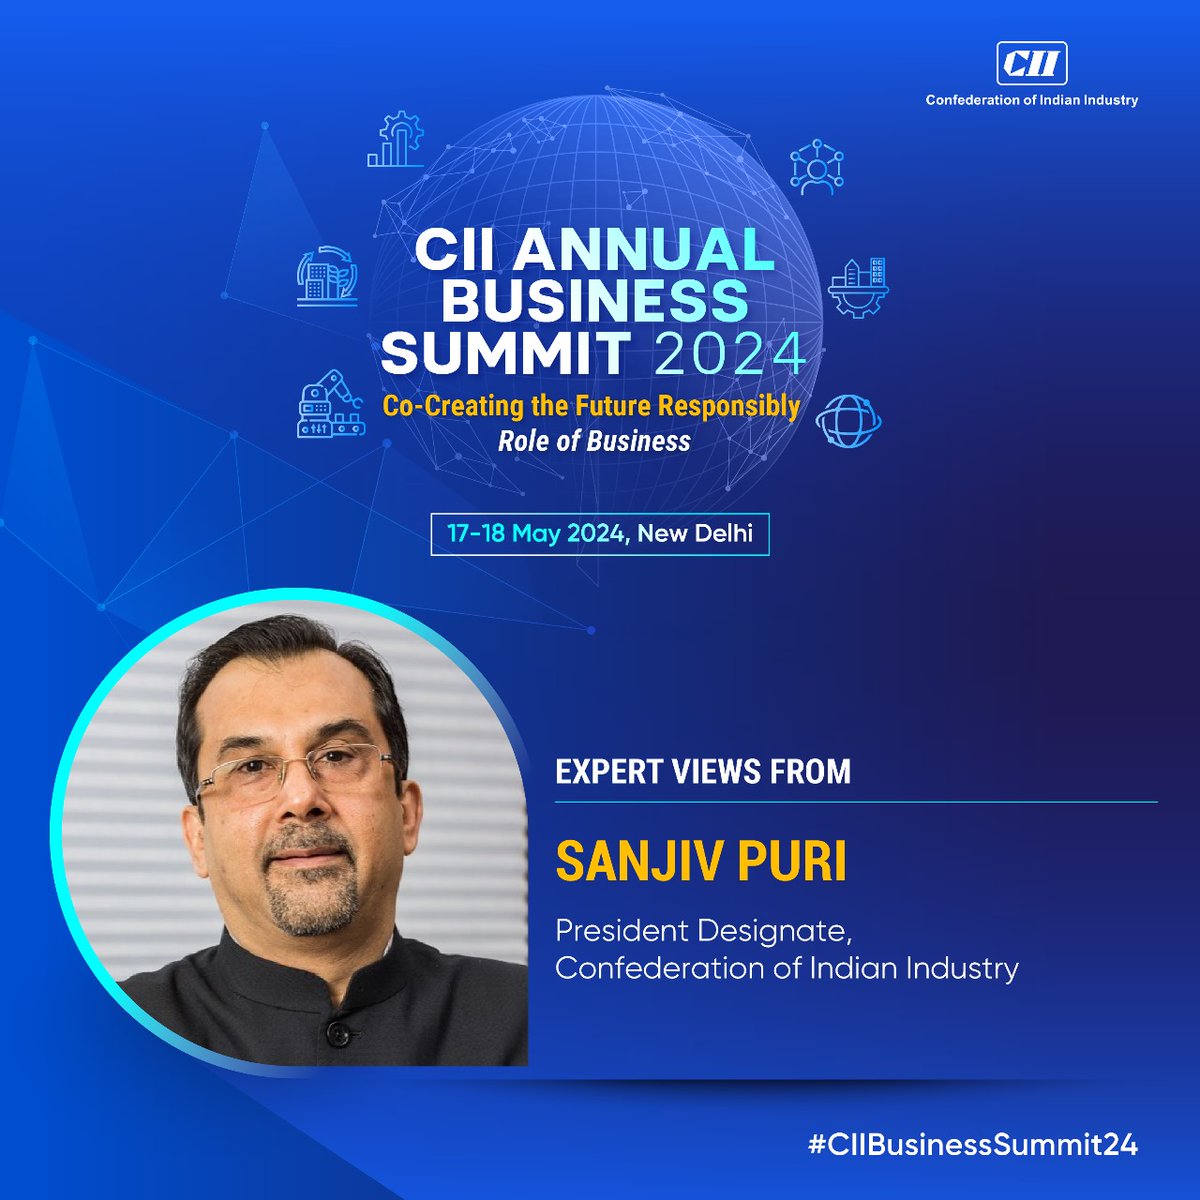 Sanjiv Puri, President Designate, CII will share thoughts at the CII Annual Business Summit 2024! Experts & thought leaders convene to discuss the future of India as it emerges as a significant player on the global stage. Date ➡17-18 May #CIIBusinessSummit24 #Growth #development